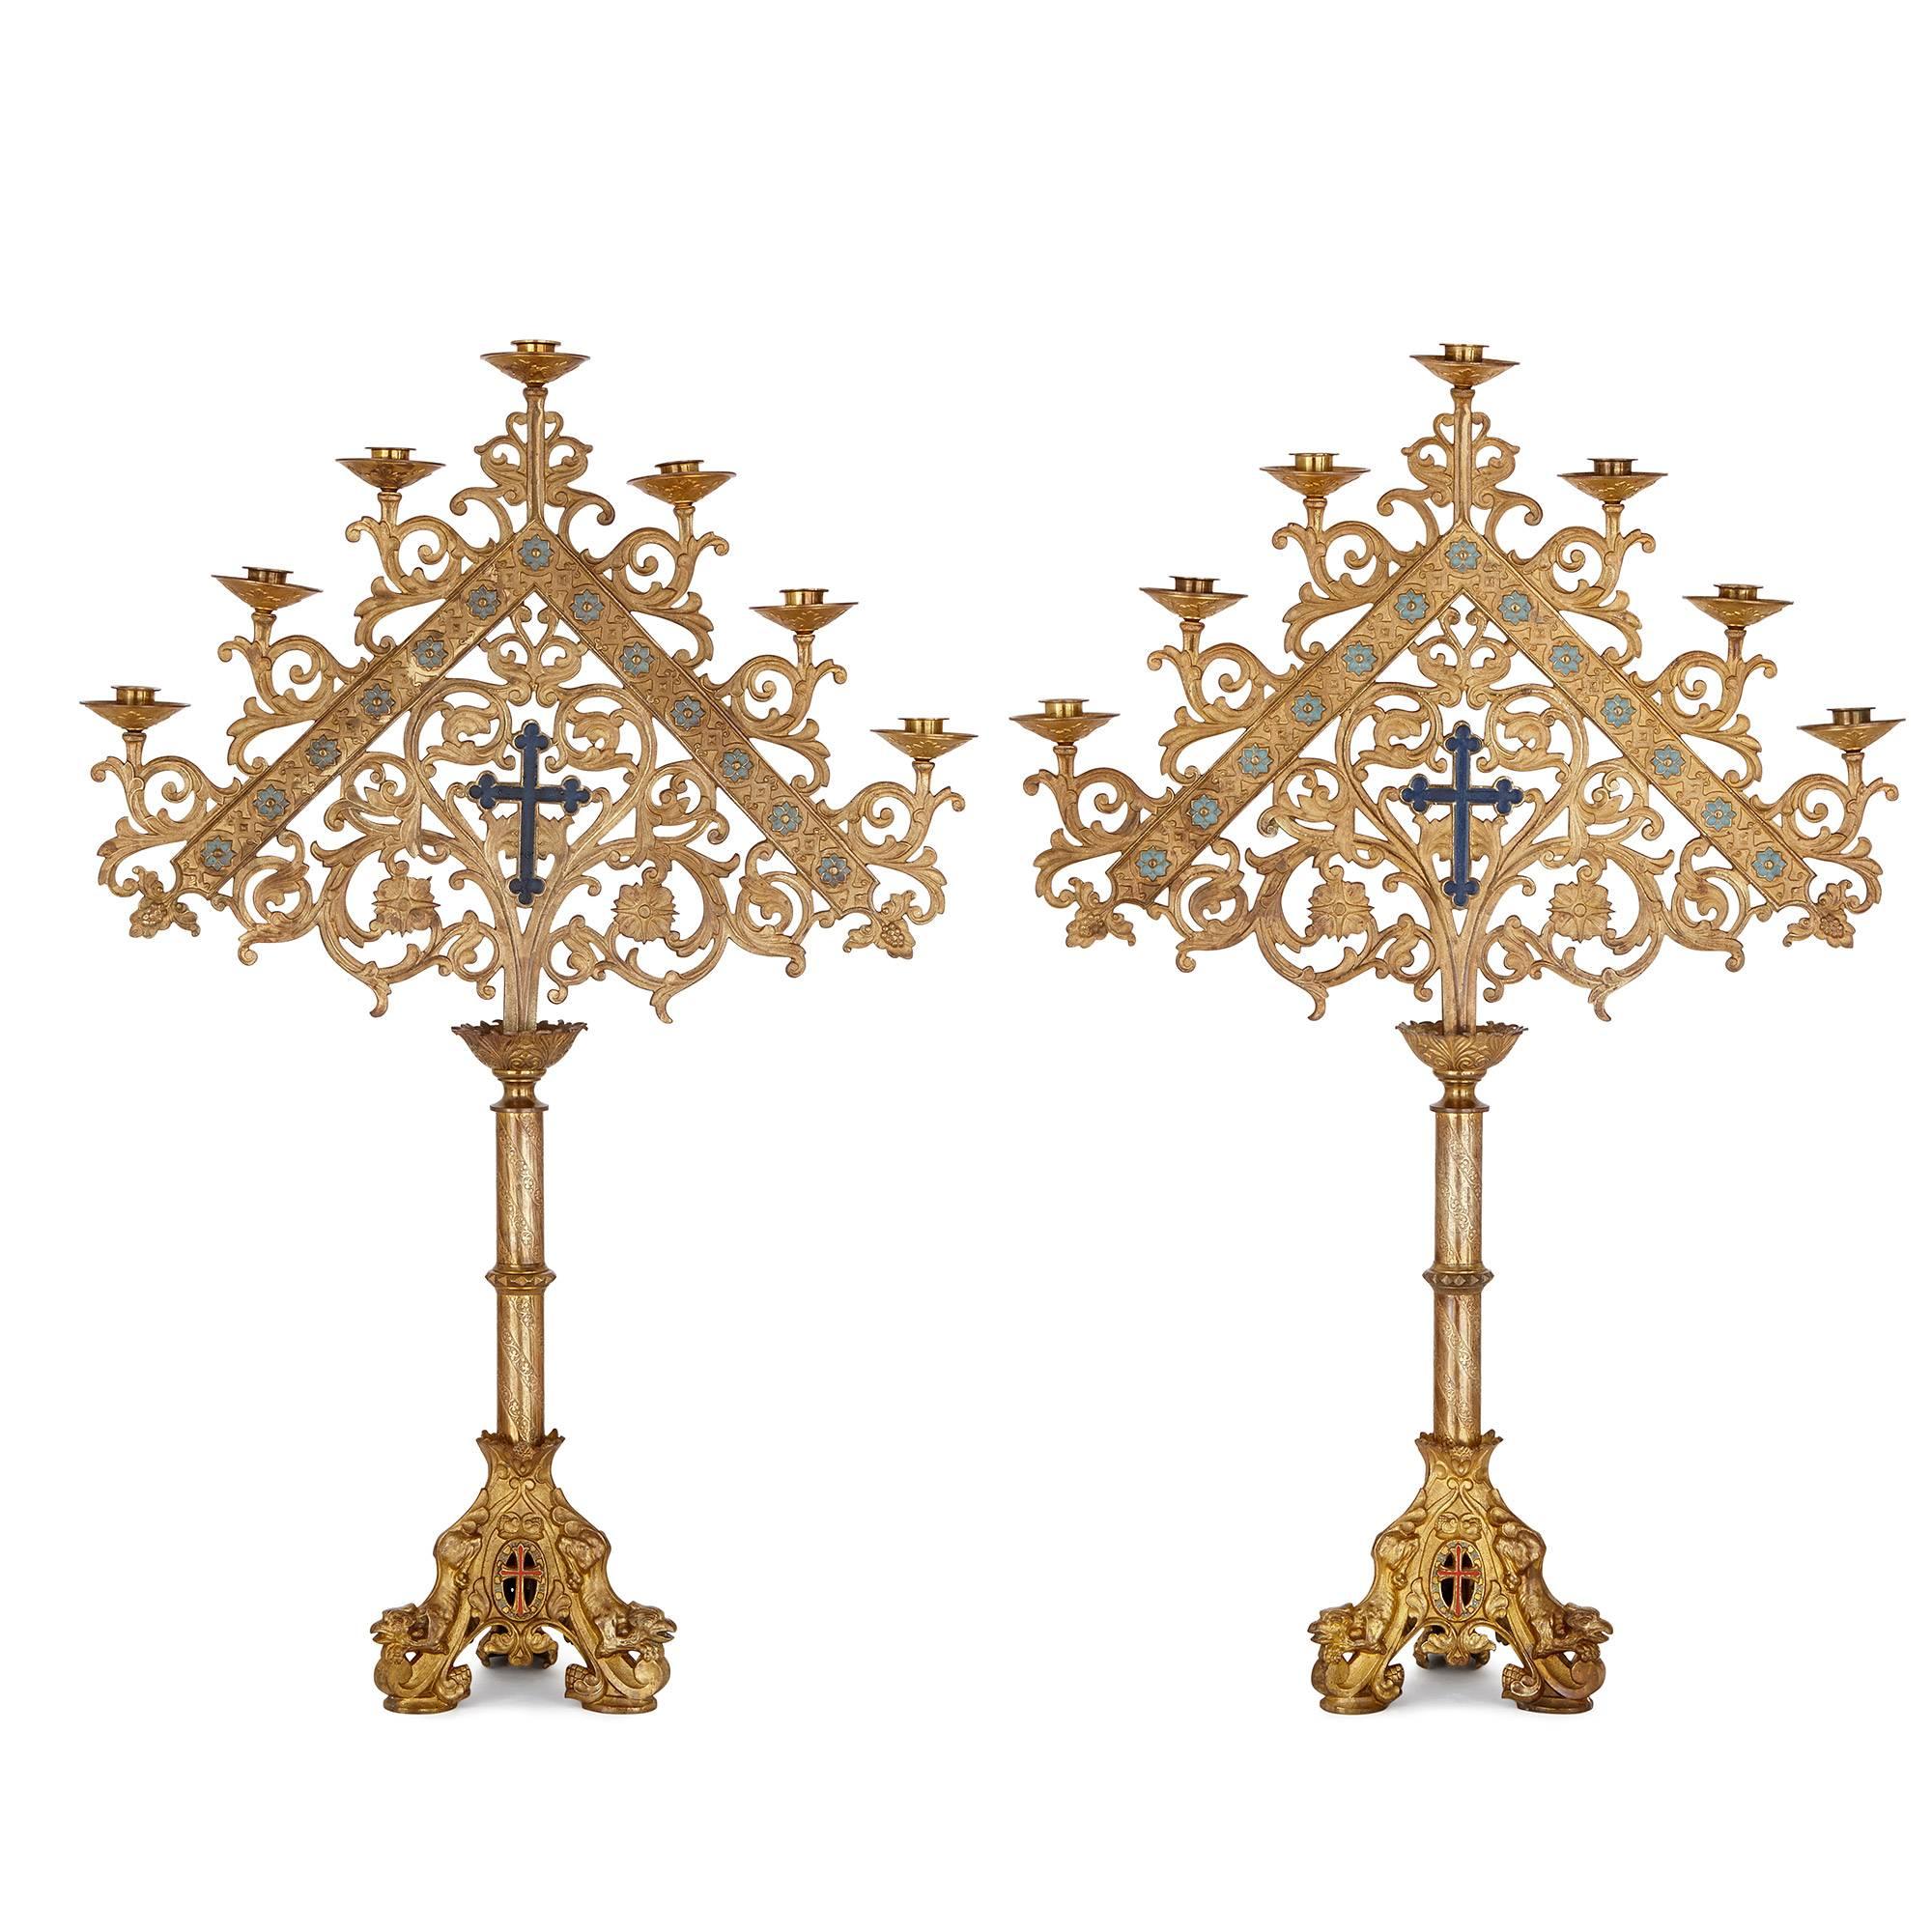 Finely worked in gilt bronze, and delicately enameled, this impressive pair of altar candlesticks is the work of an exceptionally skilled craftsman. Built in the Baroque style, each candelabrum has seven lights arranged in a triangular shape, each